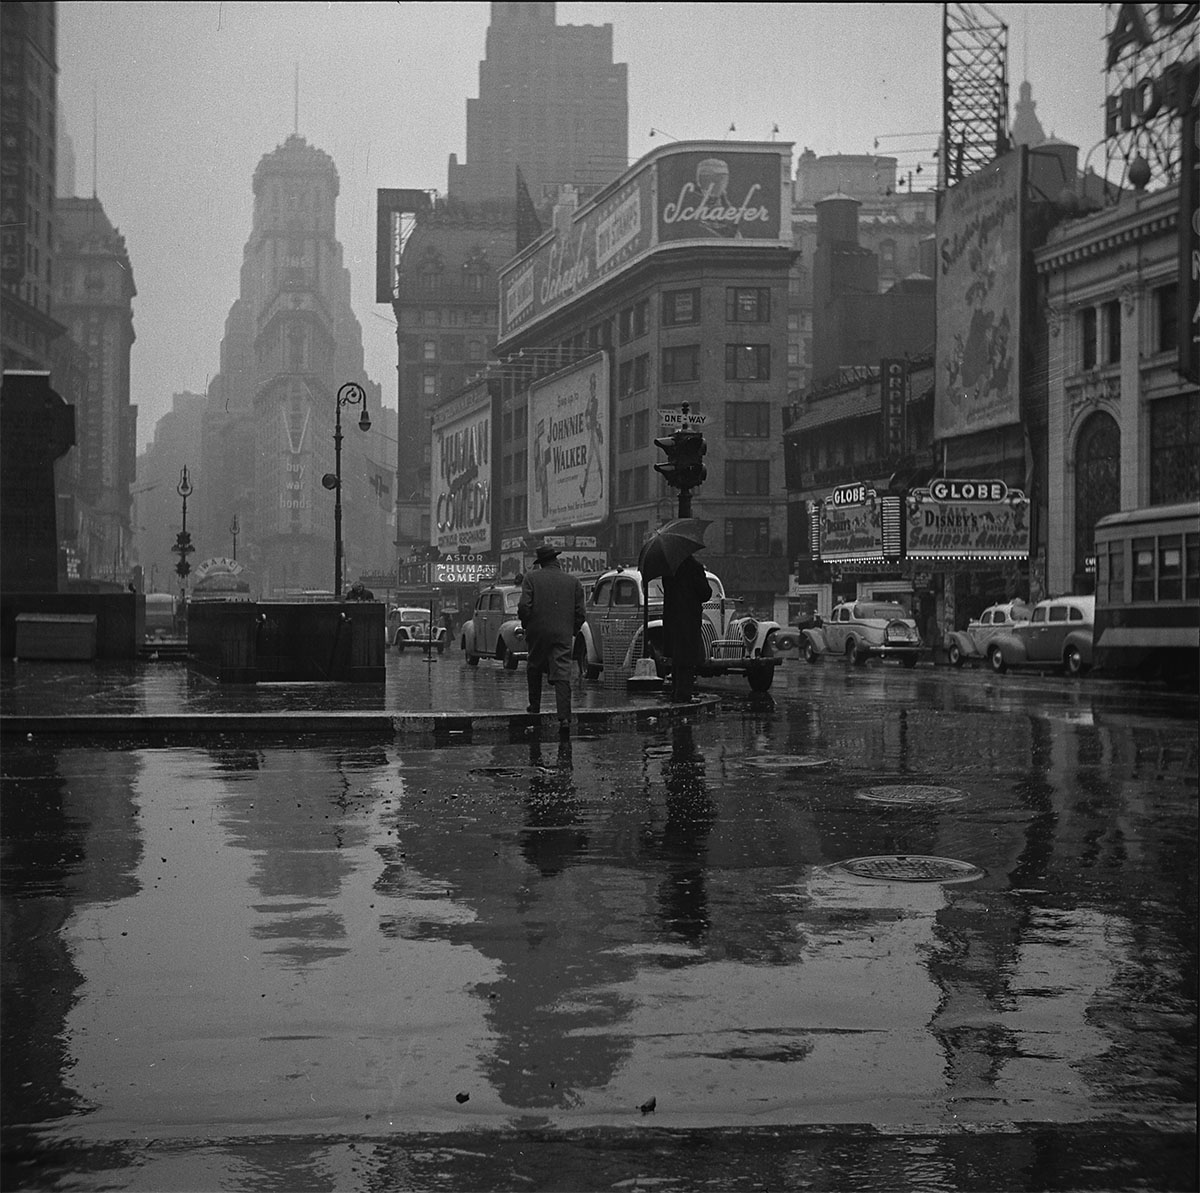 Times Square, New York City, on a rainy day, March 1943 - Library of Congress<p>© John Vachon</p>